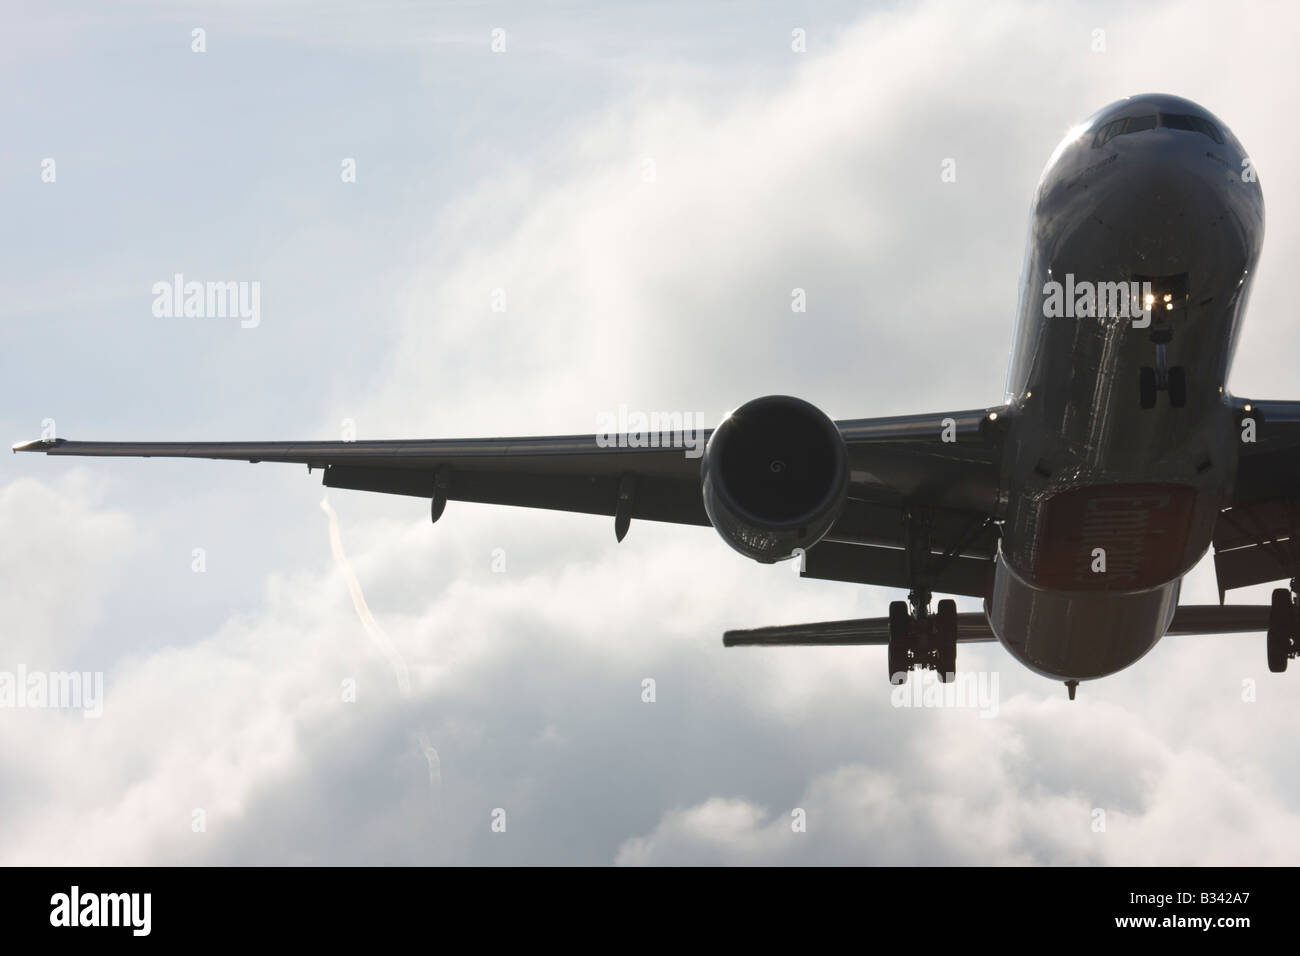 Commercial aeroplane on approach with visible wingtip vortices Stock Photo